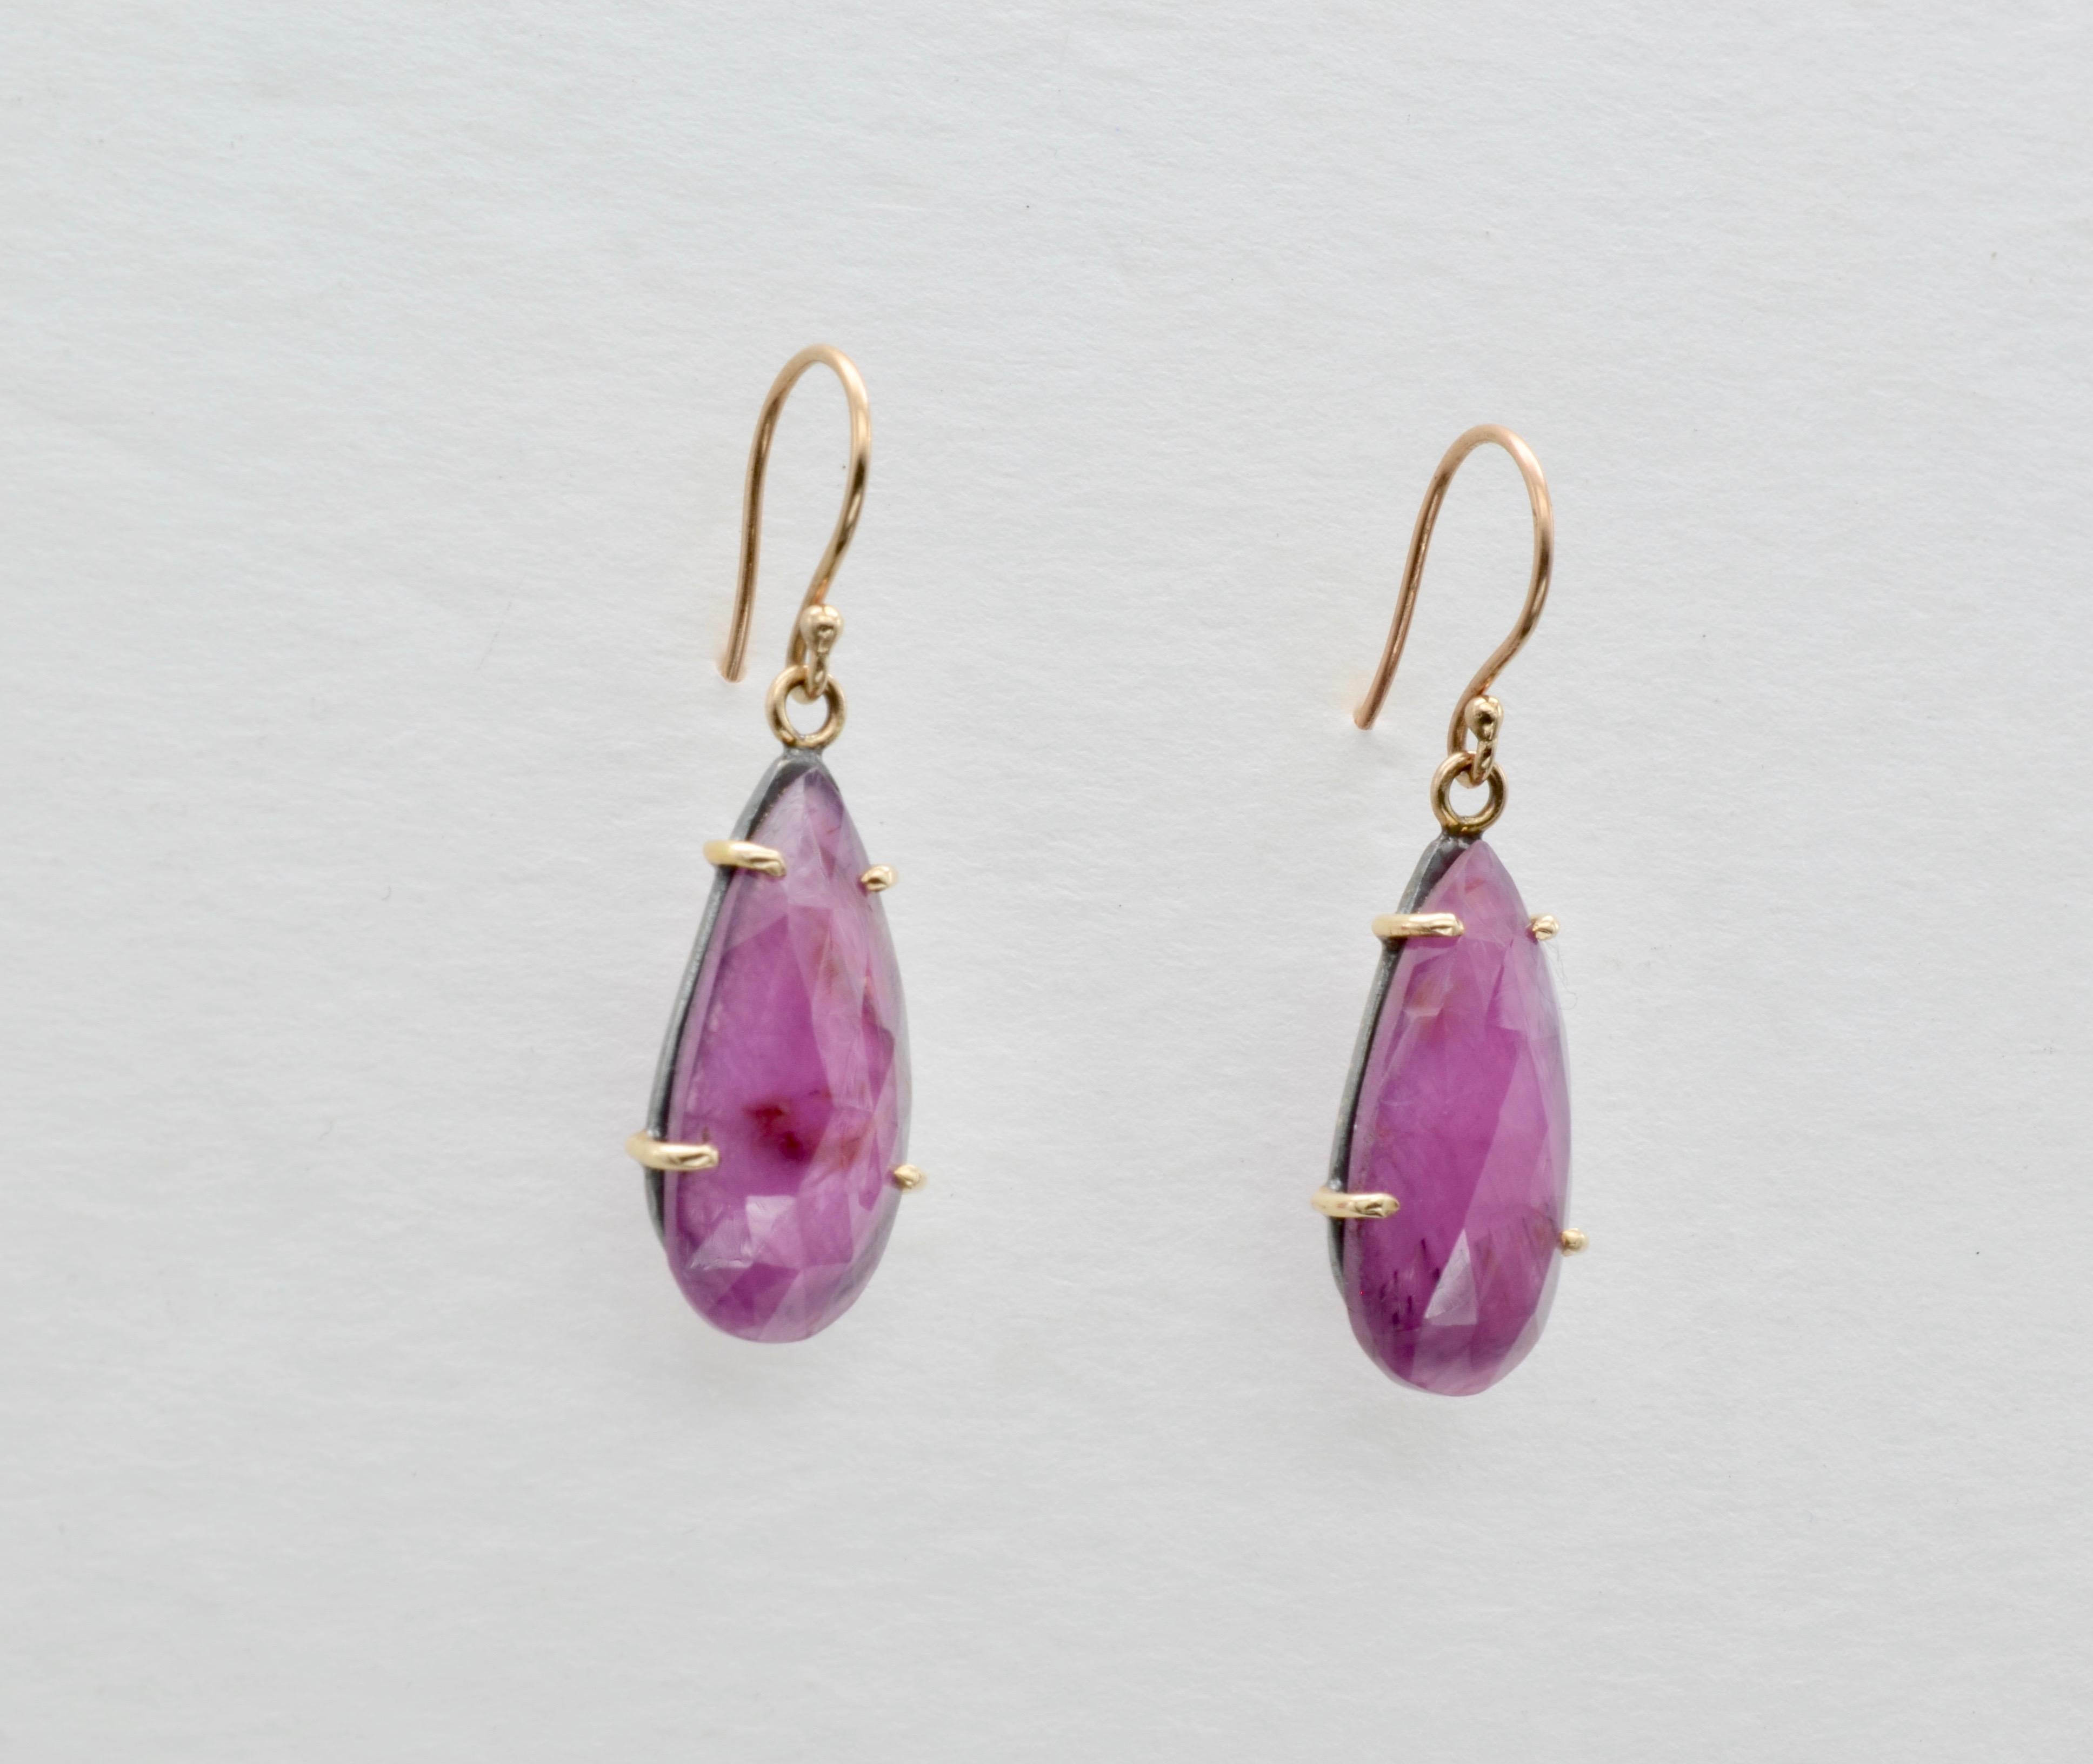 These ruby earrings are modern and lovely. The rubies are rose cut and set in oxidized sterling silver with 14k gold prongs and ear wires. The drop earrings are fun and can be worn for any occasion. 